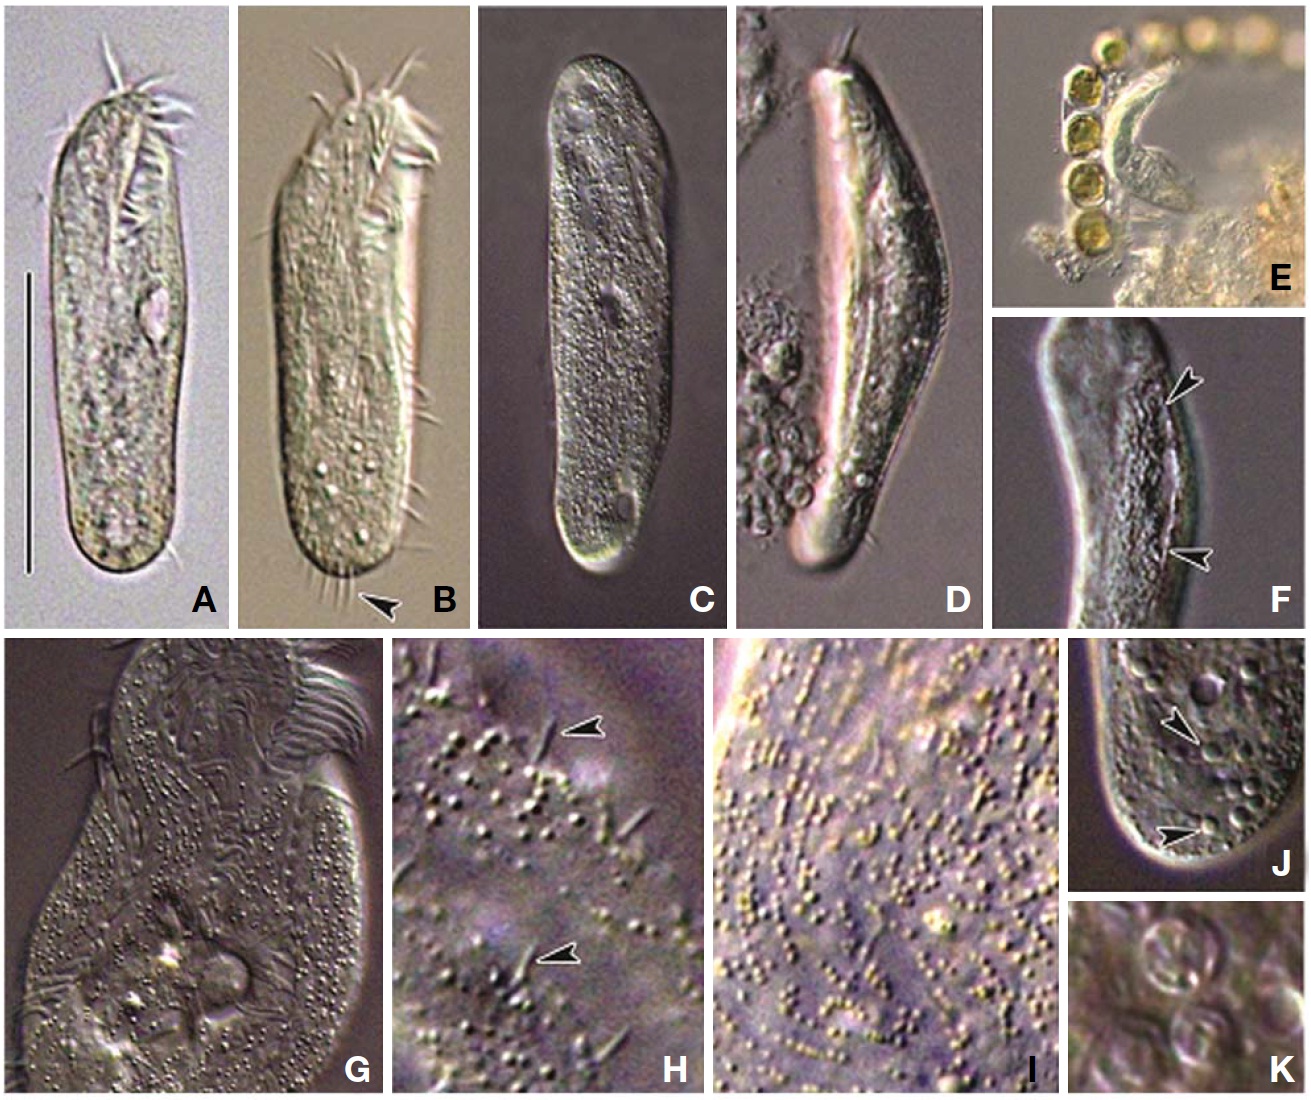 Photomicrographs of Afroamphisiella multinucleata from live specimens. A, Ventral view of typical cell; B, Somatic ciliature and end of right marginal row (arrowhead) on ventral side; C, Arrangement of cortical granules on dorsal side; D, Flattened lateral view; E, Showing flexible body; F, Contractile vacuole with collecting canal (arrowheads); G, Arrangement of cortical granules on ventral side; H, Dorsal bristles (arrowheads); I, Patterns of cortical granules on dorsal side; J, Fat granules of posterior part (arrowheads); K, Food vacuoles. Scale bar: A=50 μm.